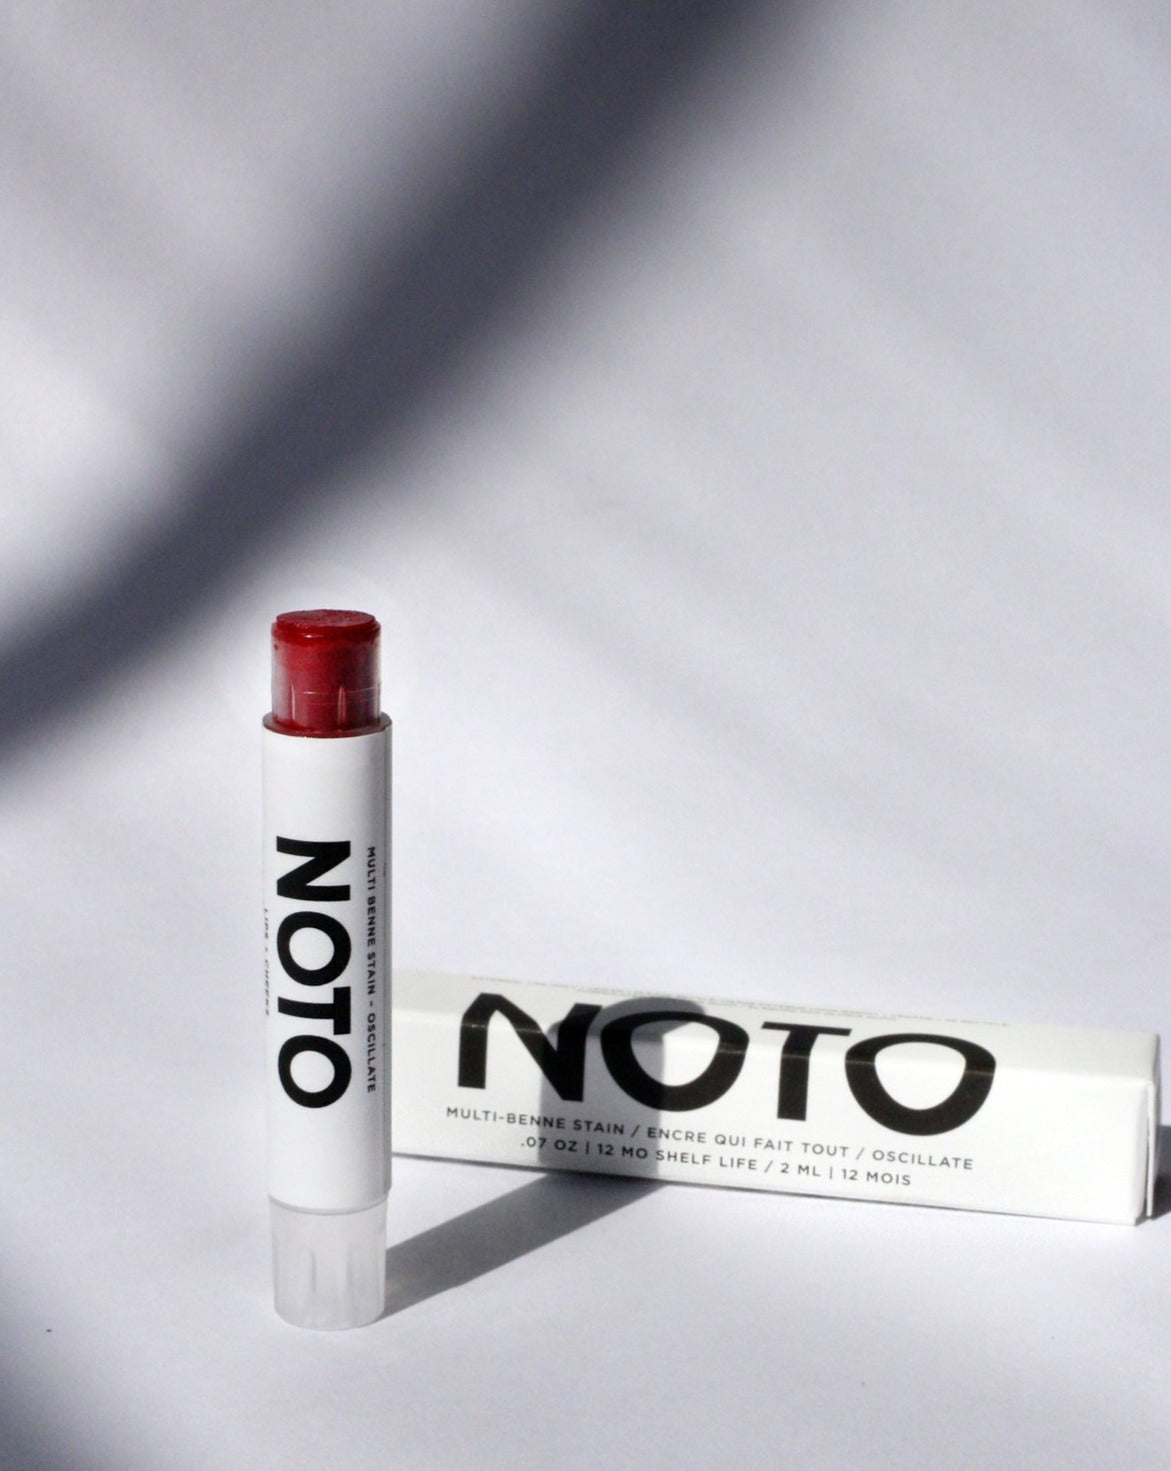 NOTO Multi-Benne Stain Stick in Oscillate. Available at EASE Toronto. 